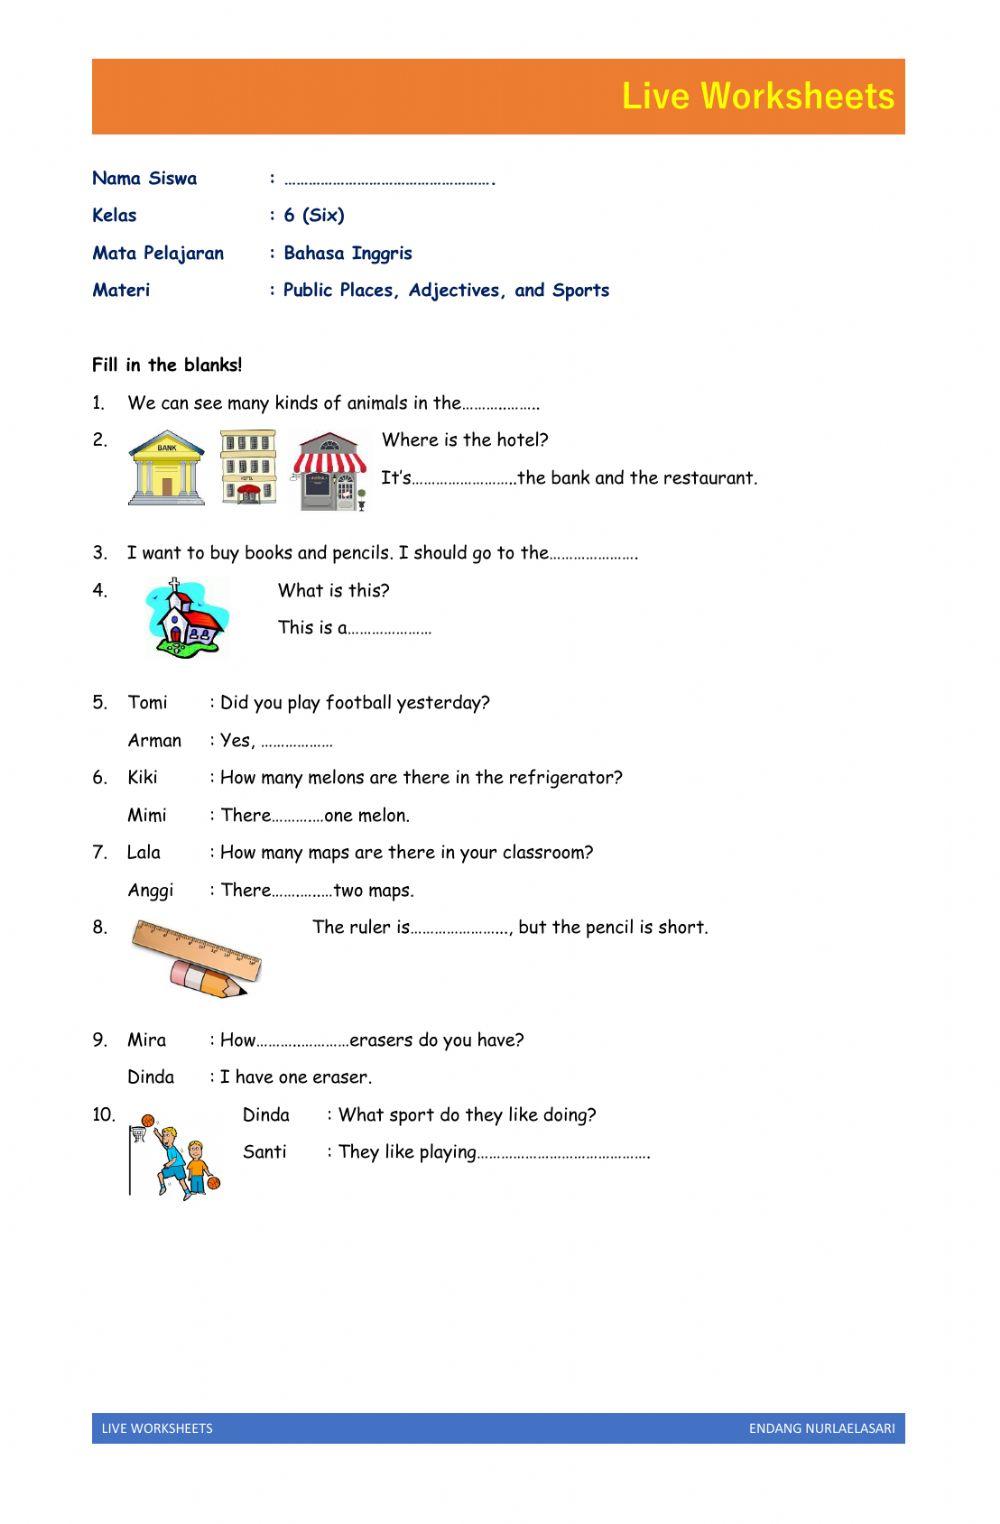 English Live Worksheet about Public Places, Adjectives, Sport